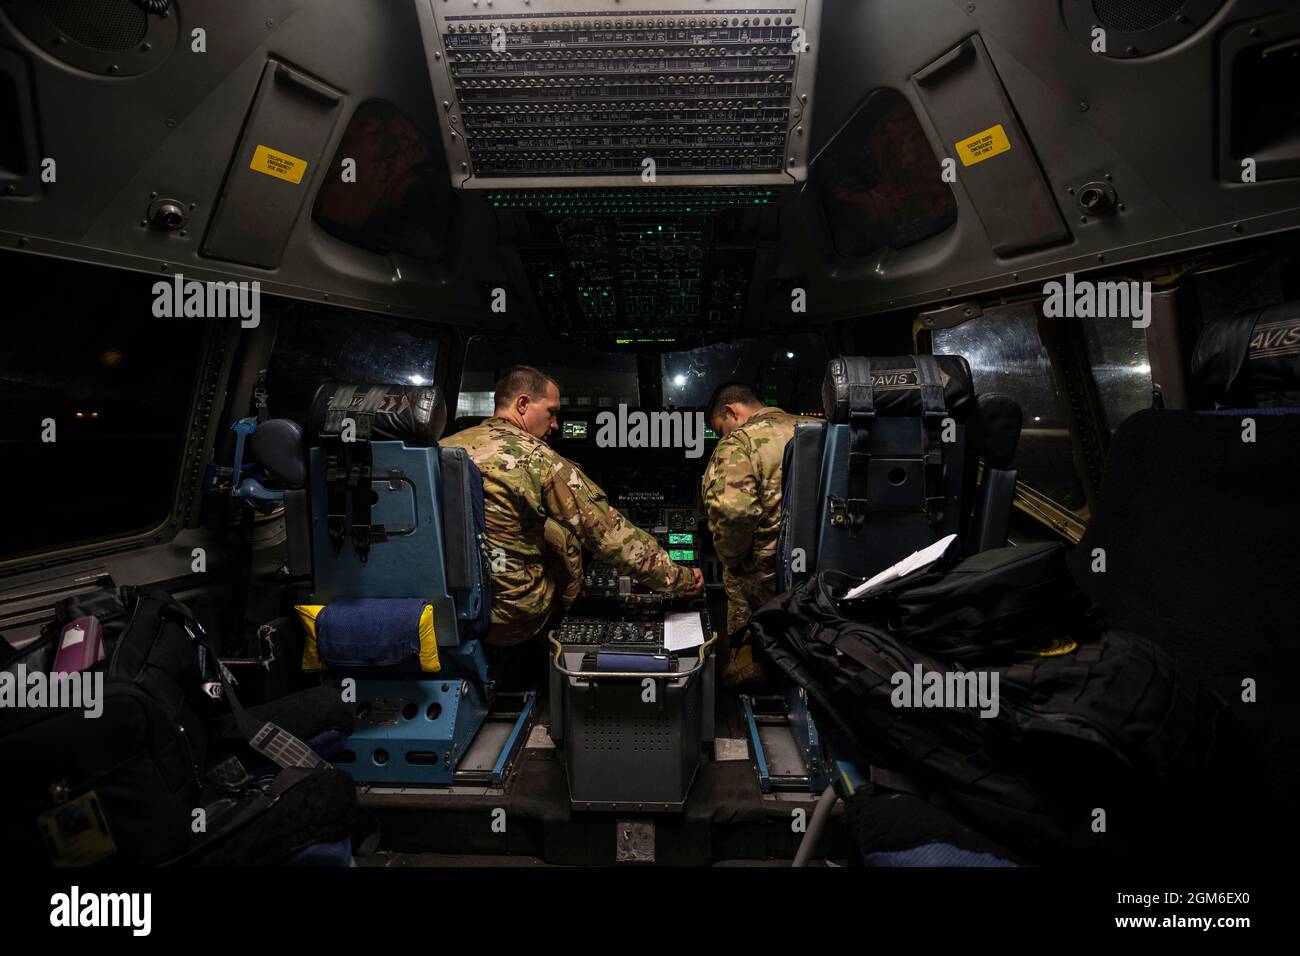 U.S. Air Force Lt. Col. Austin Street, left, 21st Airlift Squadron commander and C-17 Globemaster III pilot, and Capt. Macial St John, 21st AS C-17 pilot, perform a pre-flight checklist aboard a C-17, August 16, 2021, at Travis Air Force Base, California. The U.S. Air Force, in support of the Department of Defense, moved forces into theater to facilitate the safe departure and relocation of U.S. citizens, Special Immigration Visa recipients, and vulnerable Afghan populations from Afghanistan. (U.S Air Force photo by Nicholas Pilch) Stock Photo